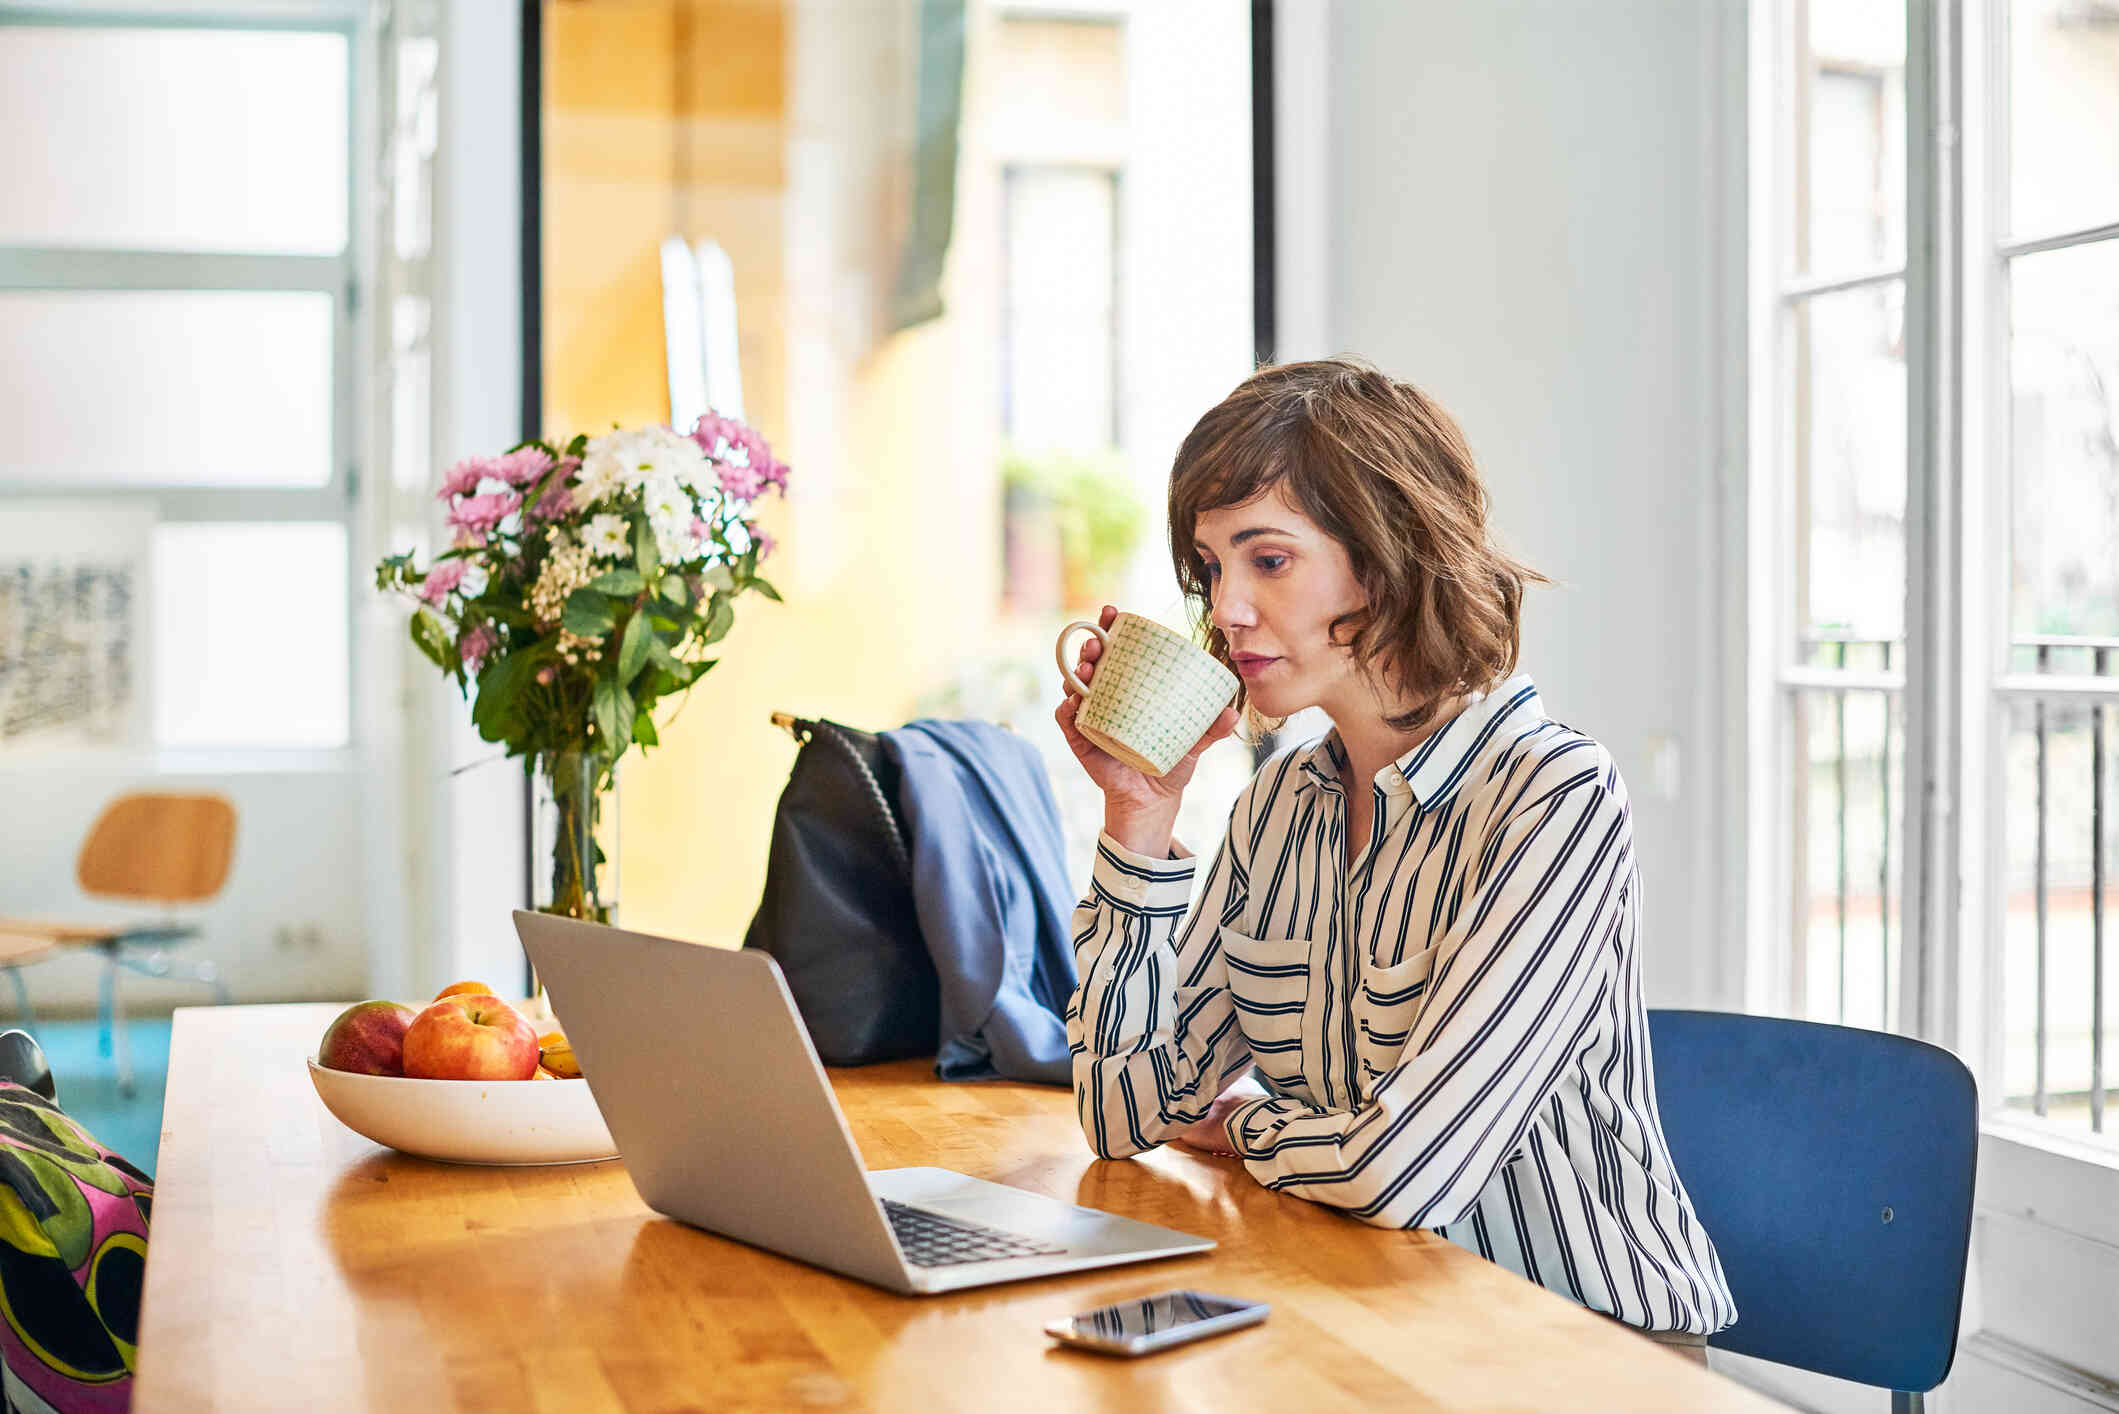 A woman in a striped shirt sips from a coffee mug while sitting at a table and looking at the lpatop open infront of her. 